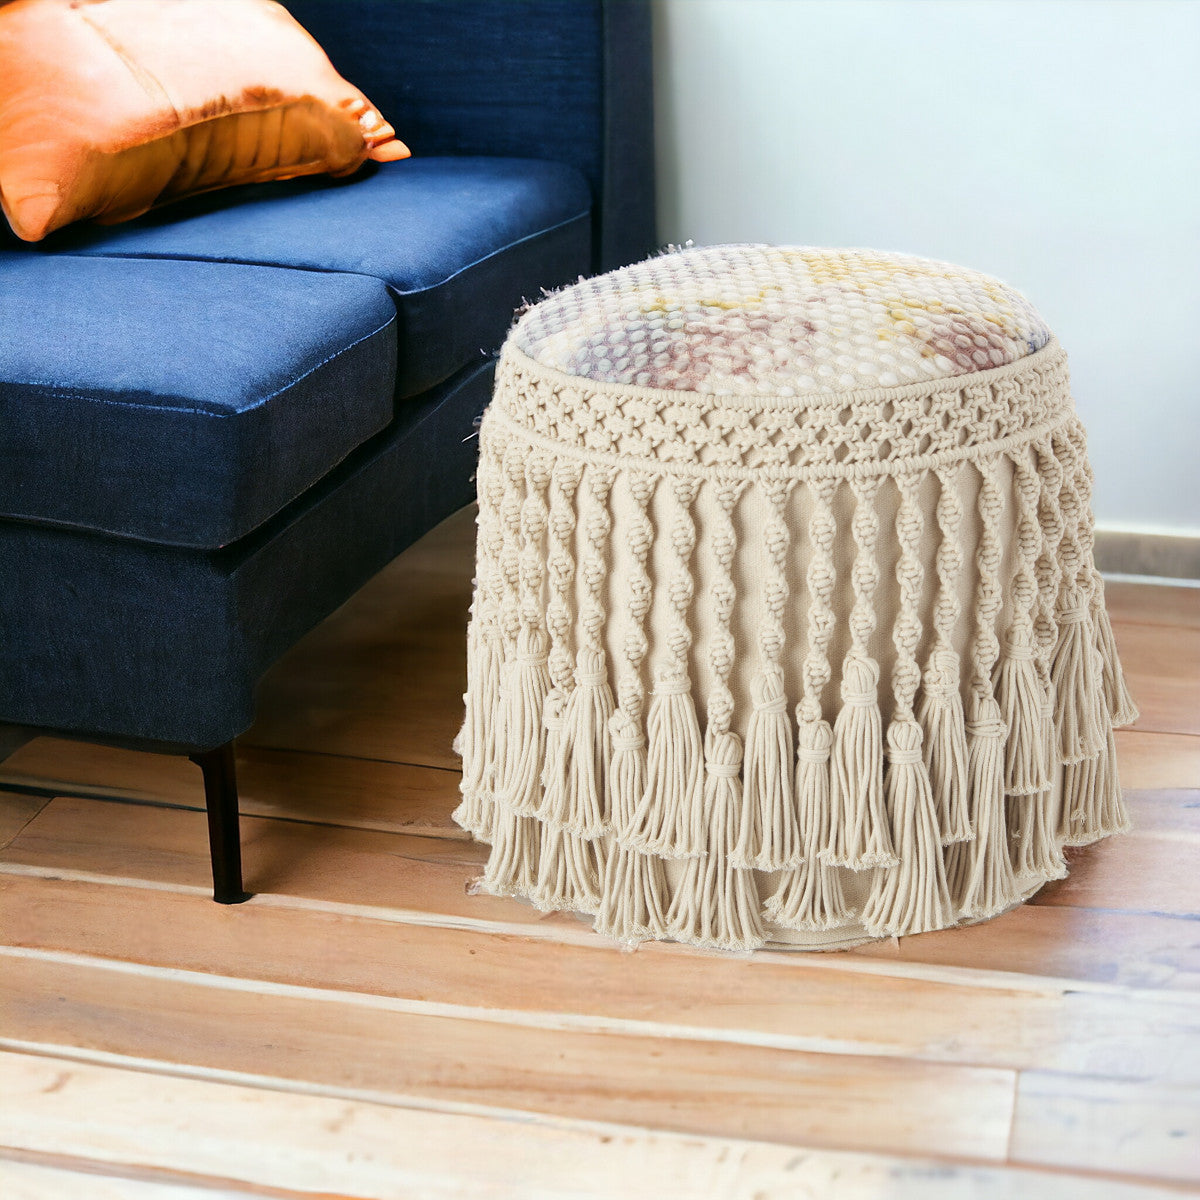 18" Ivory and Blue Cotton Round Abstract Pouf Ottoman